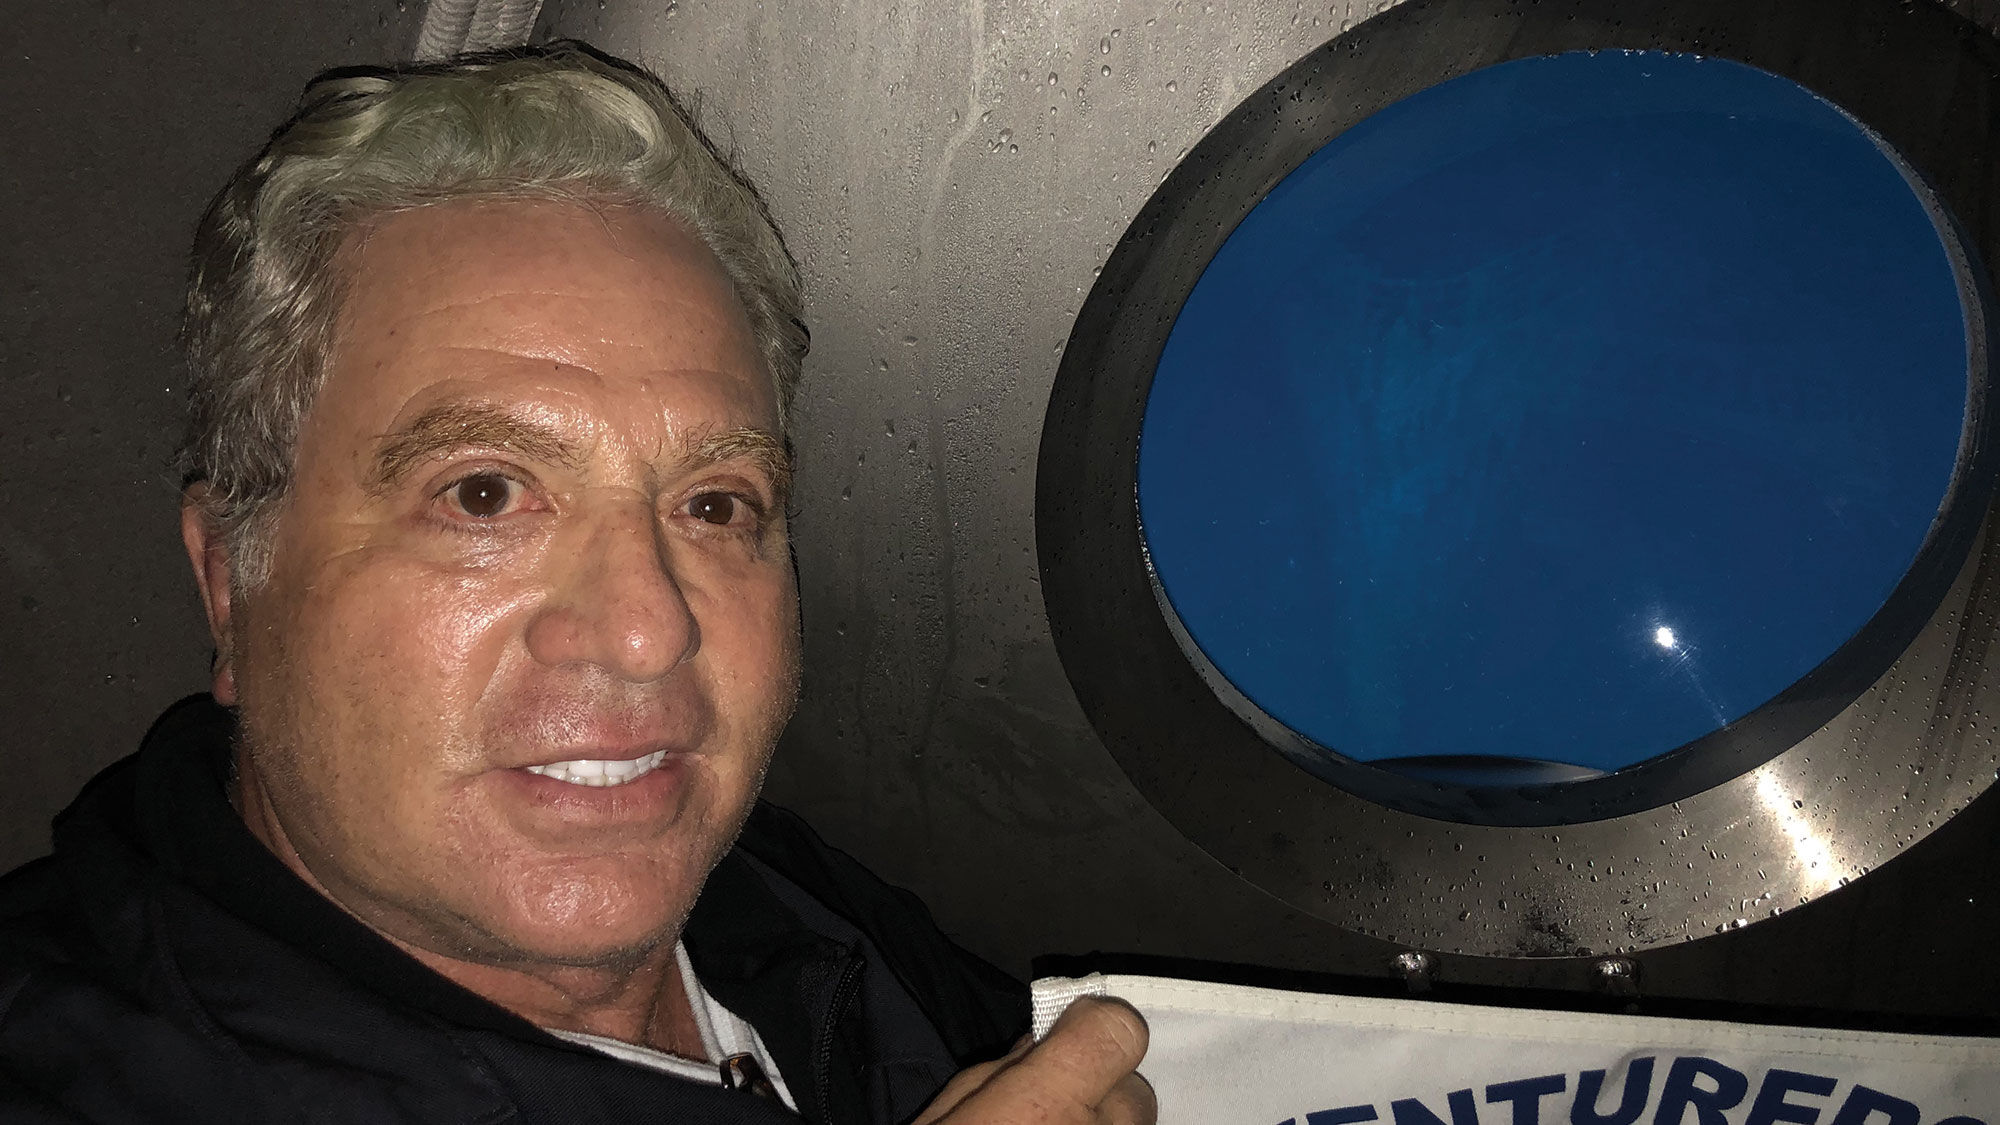 Bill Price, former president of YMT Vacations, in the OceanGate Titan submersible on a successful mission to reach the Titanic wreck at the bottom of the Atlantic Ocean.